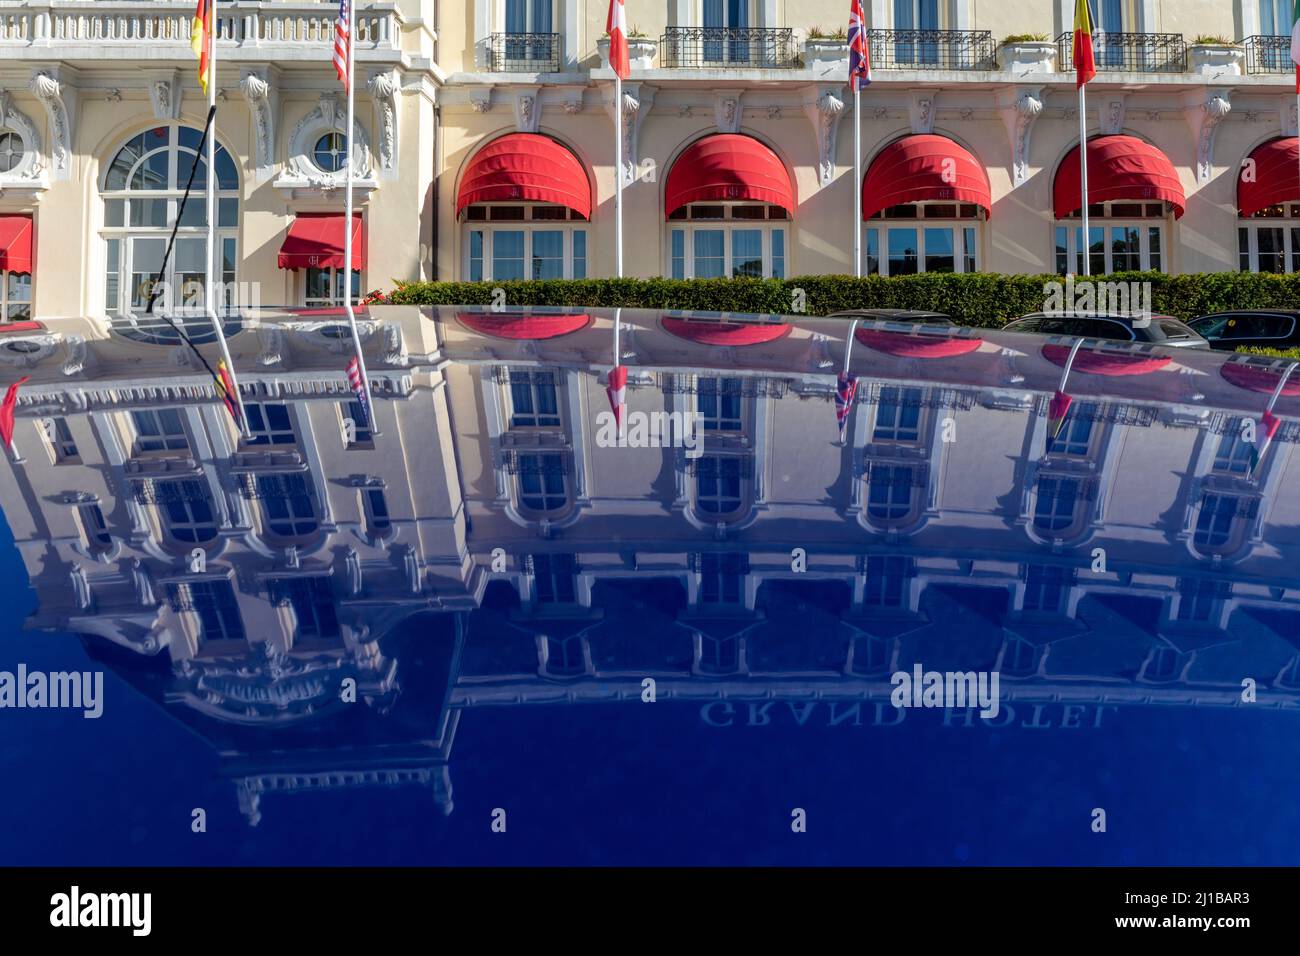 FACADE OF THE GRAND HOTEL REFLECTED IN A LUXURY CAR, CABOURG, CALVADOS, NORMANDY, FRANCE Stock Photo